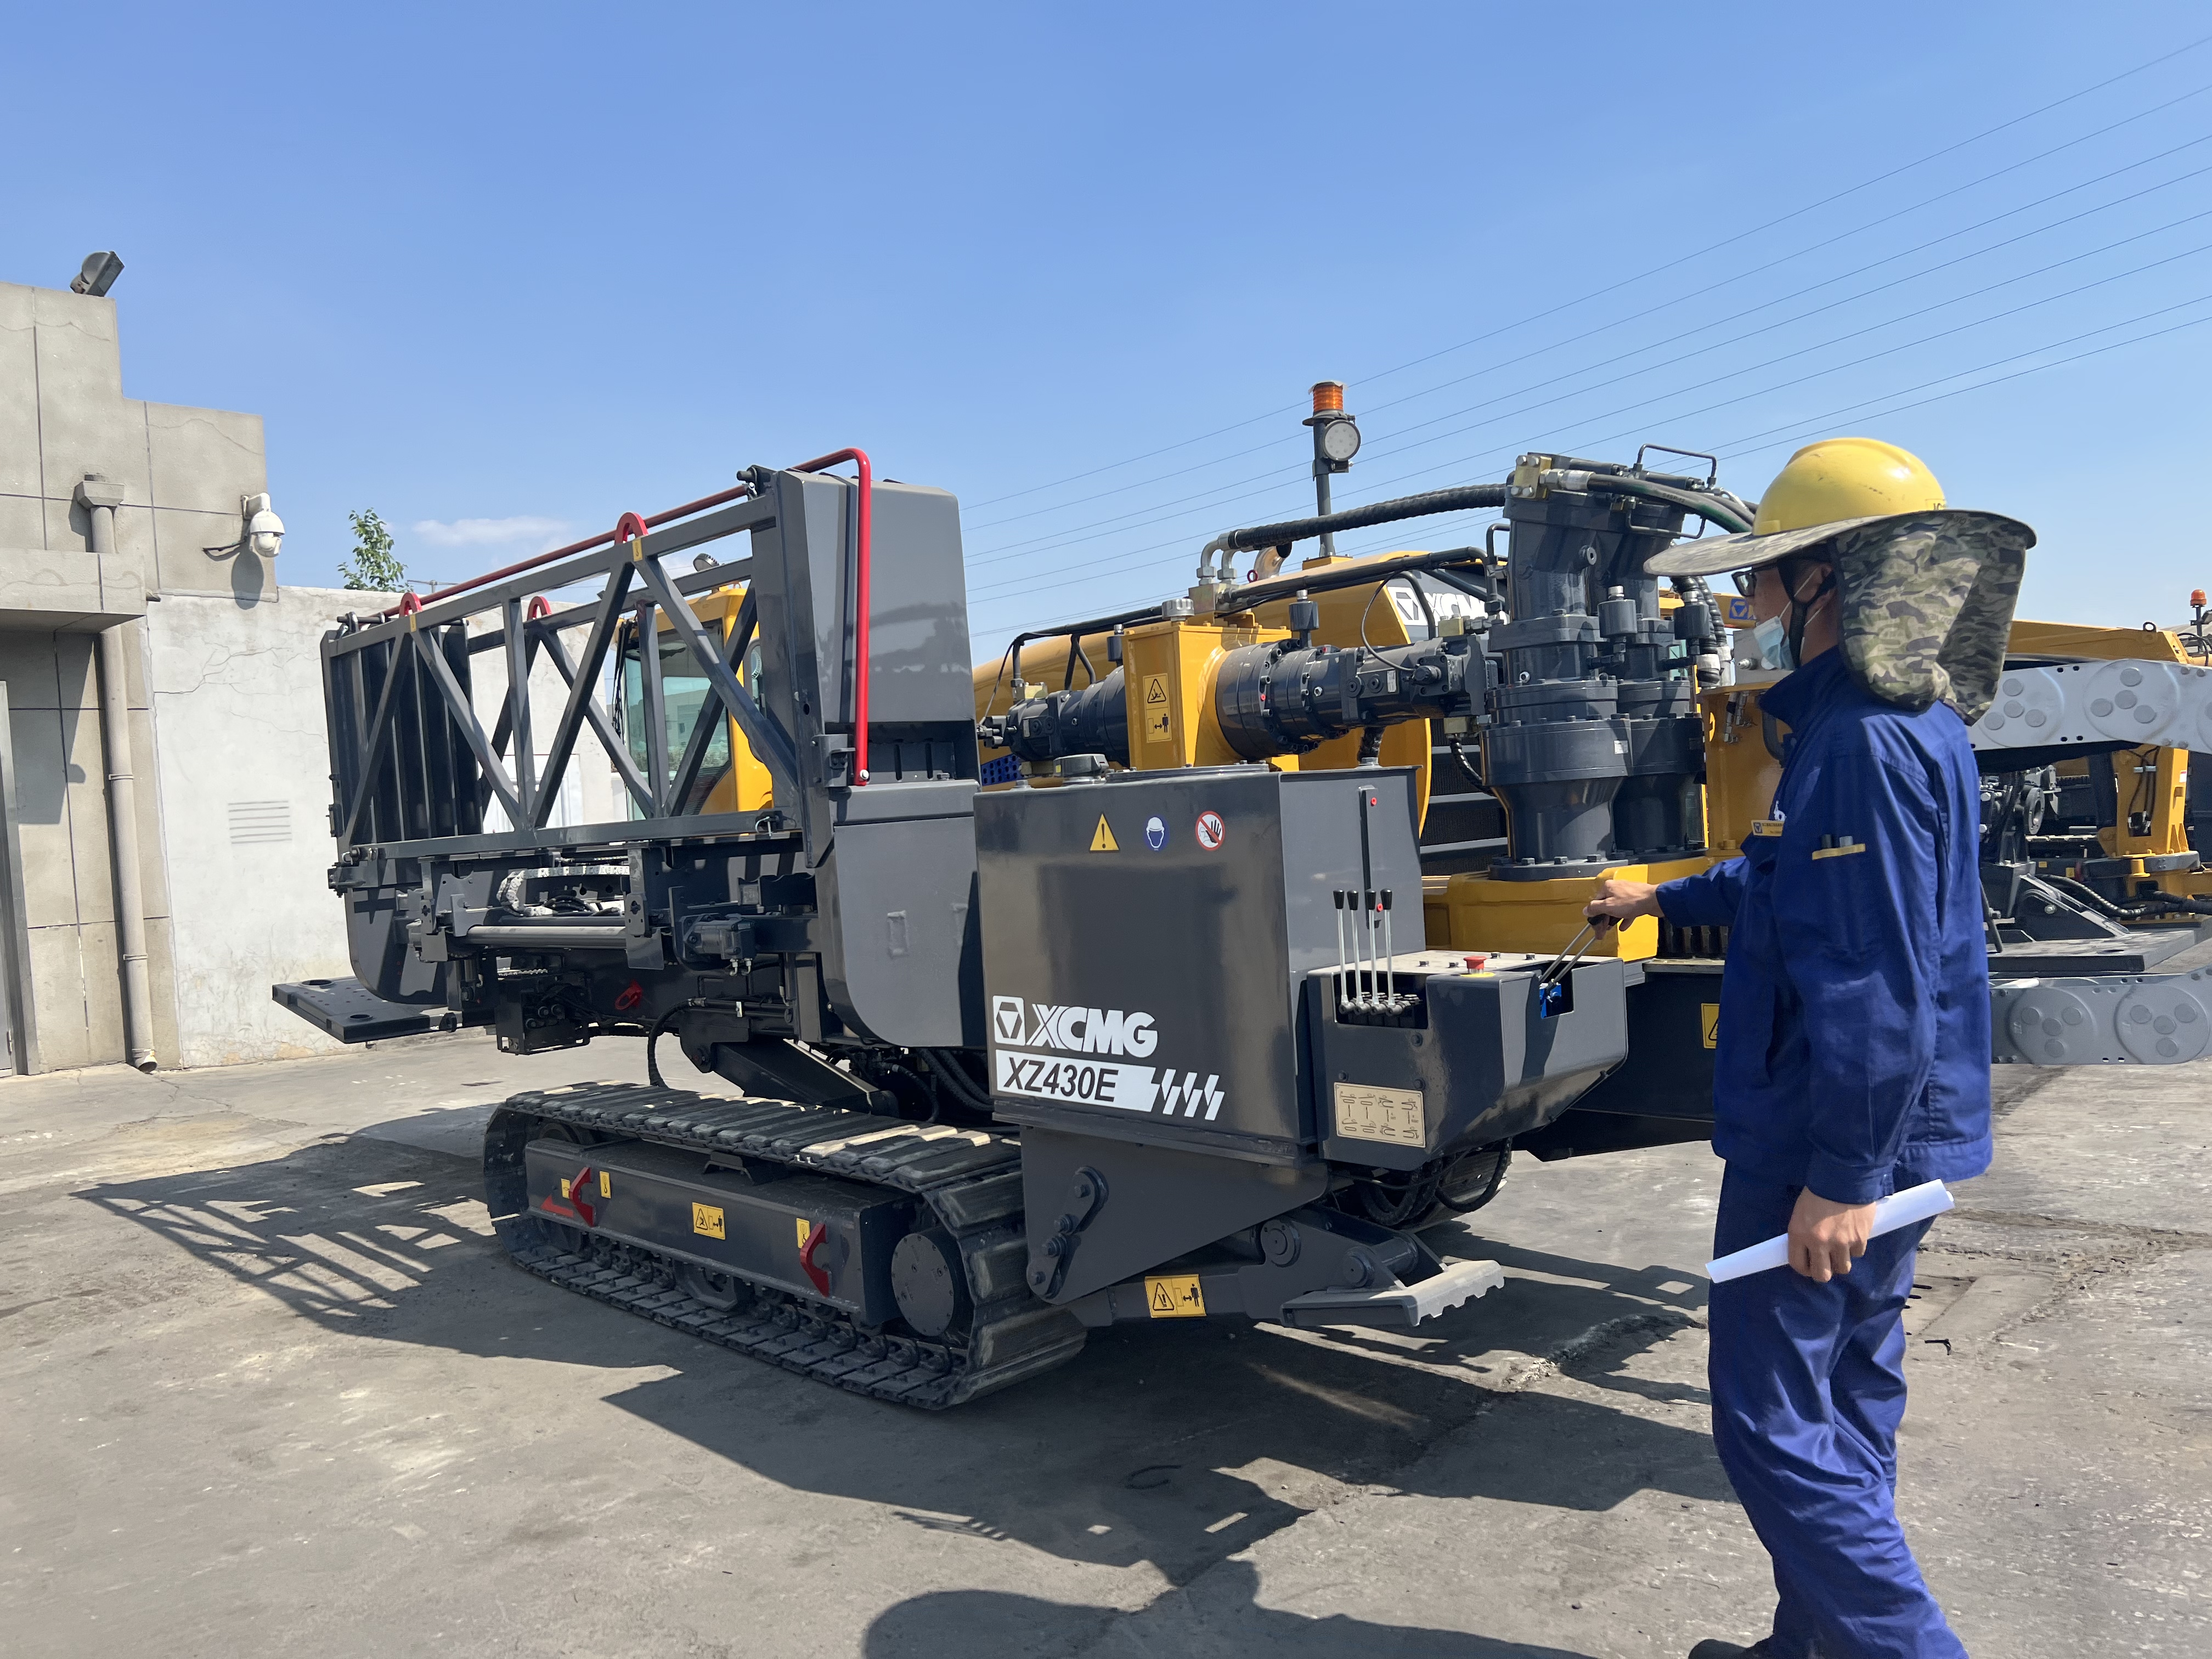 XCMG XZ430E Horizontal Directional Drilling Rig HDD rig